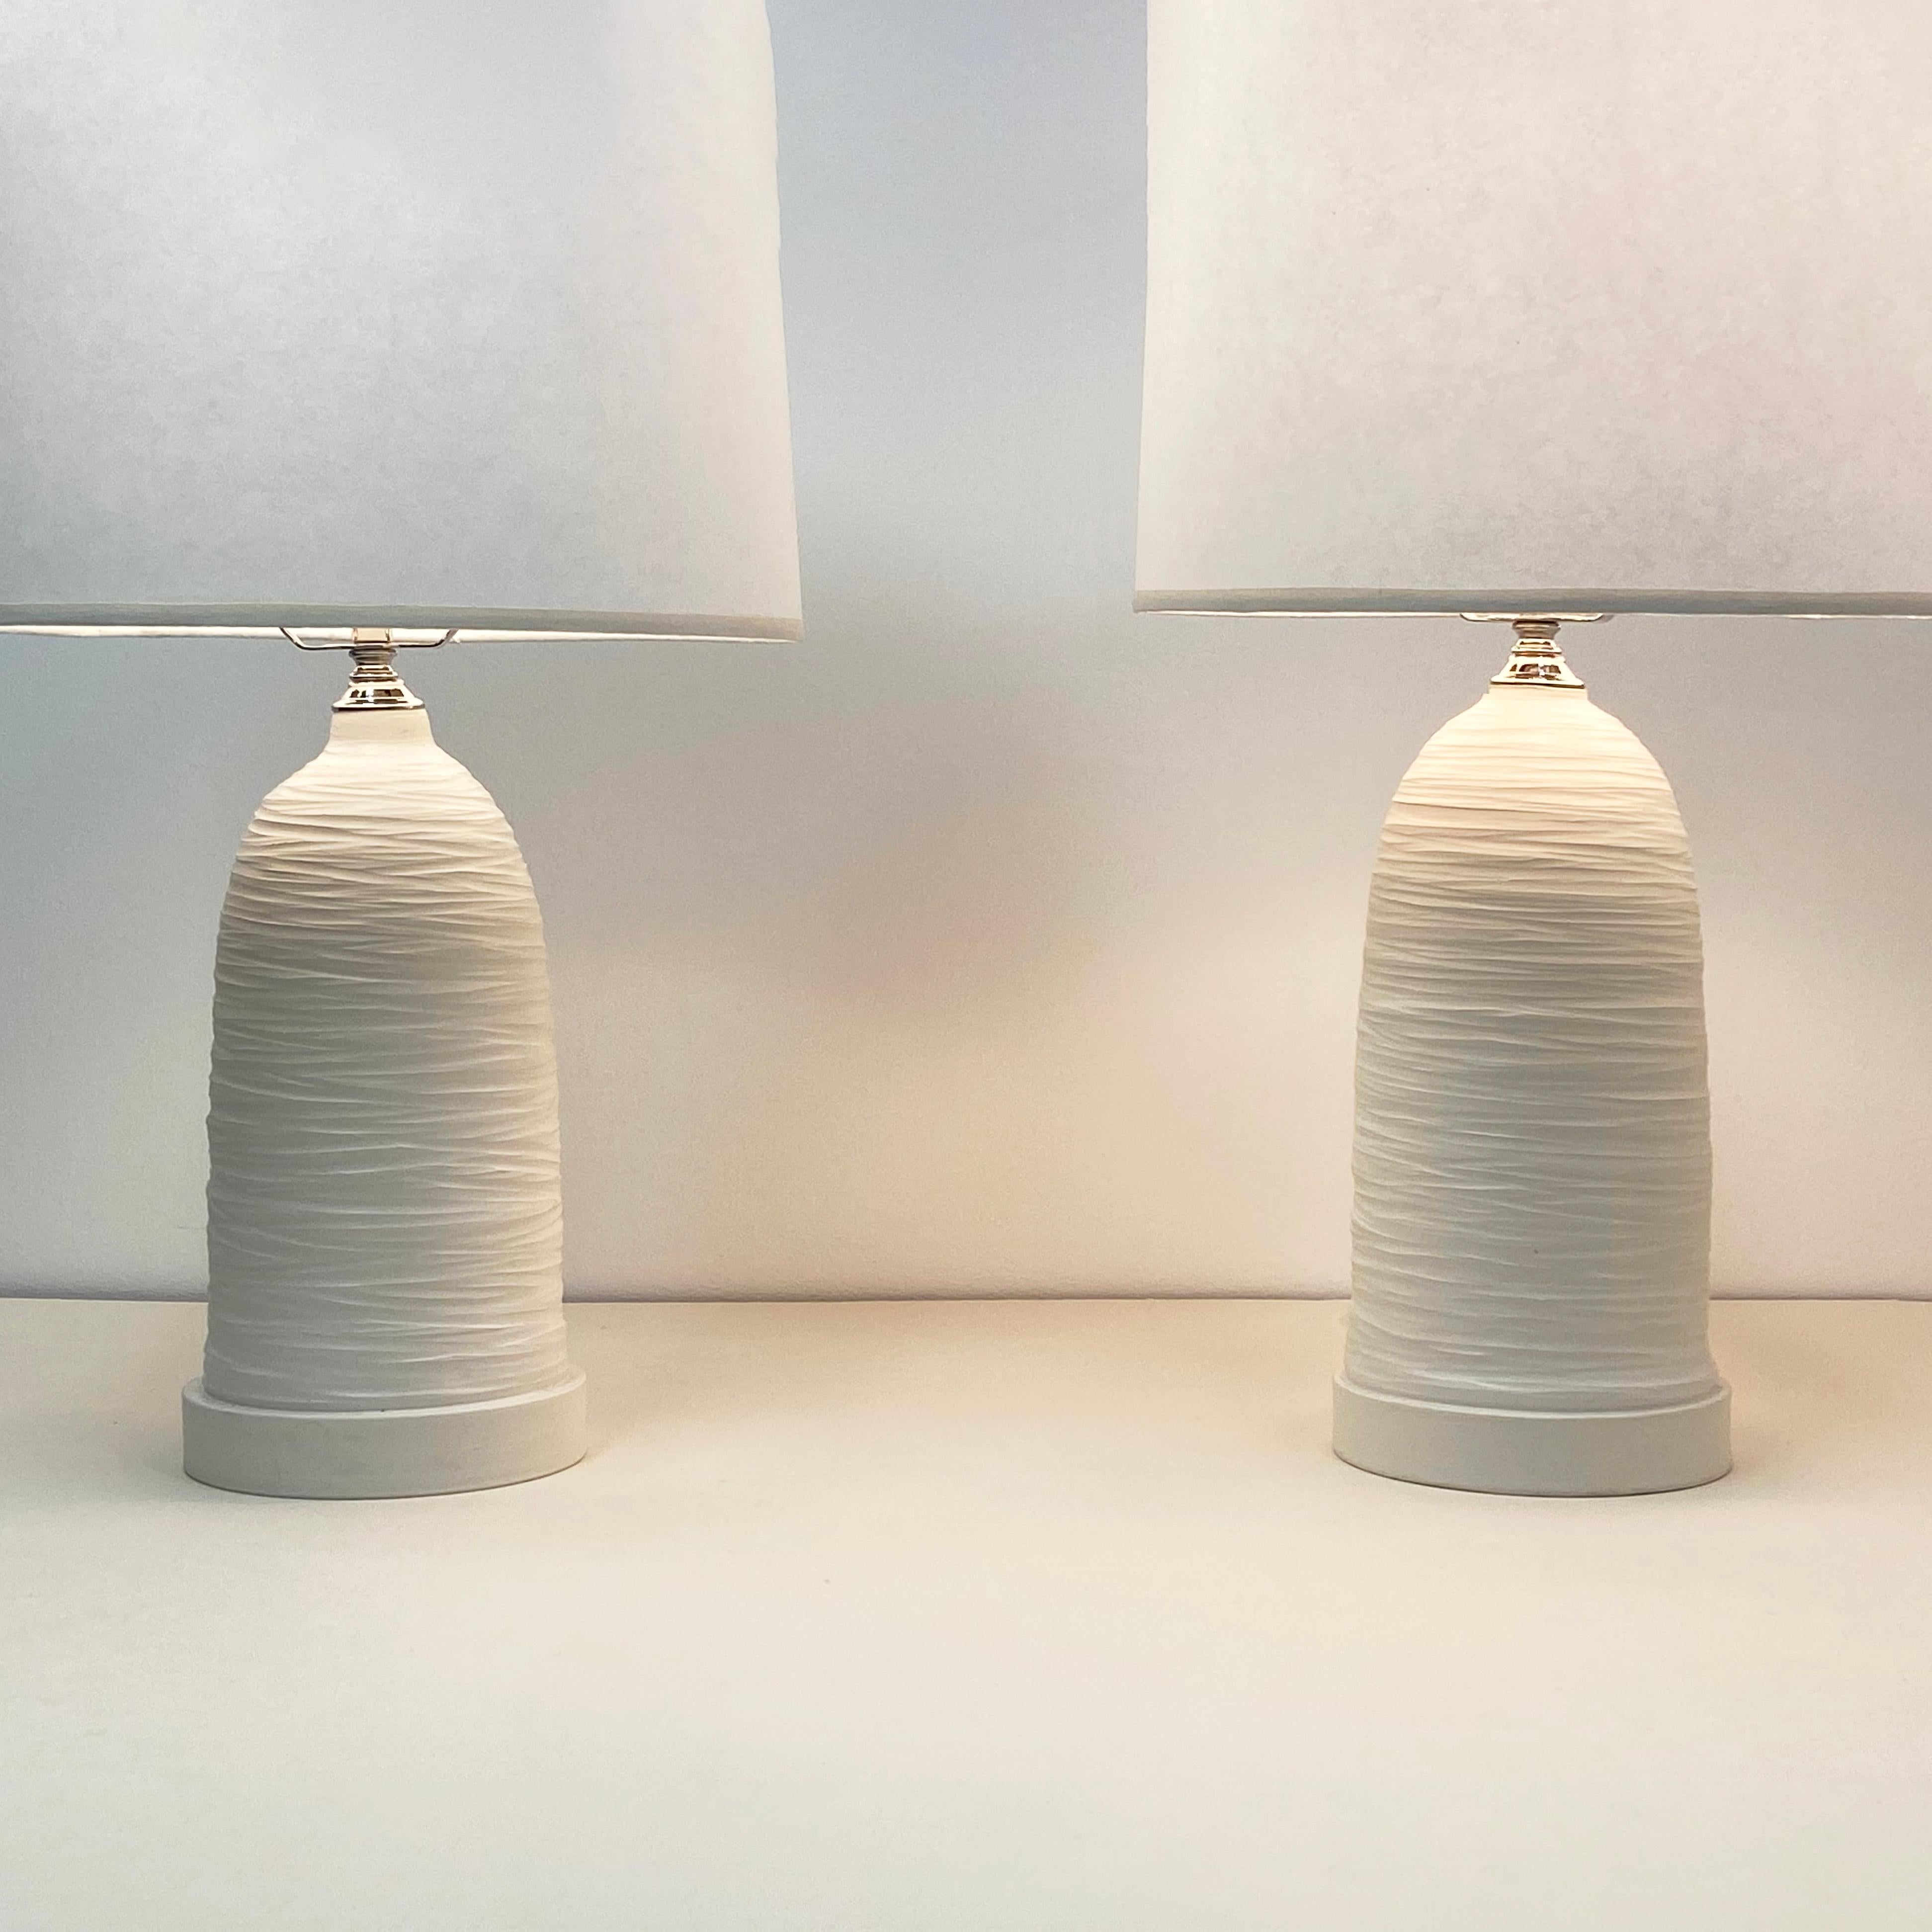 Handmade Wheel-thrown Large Lamp pair Textured deco by Olivia Barry / By Hand 7